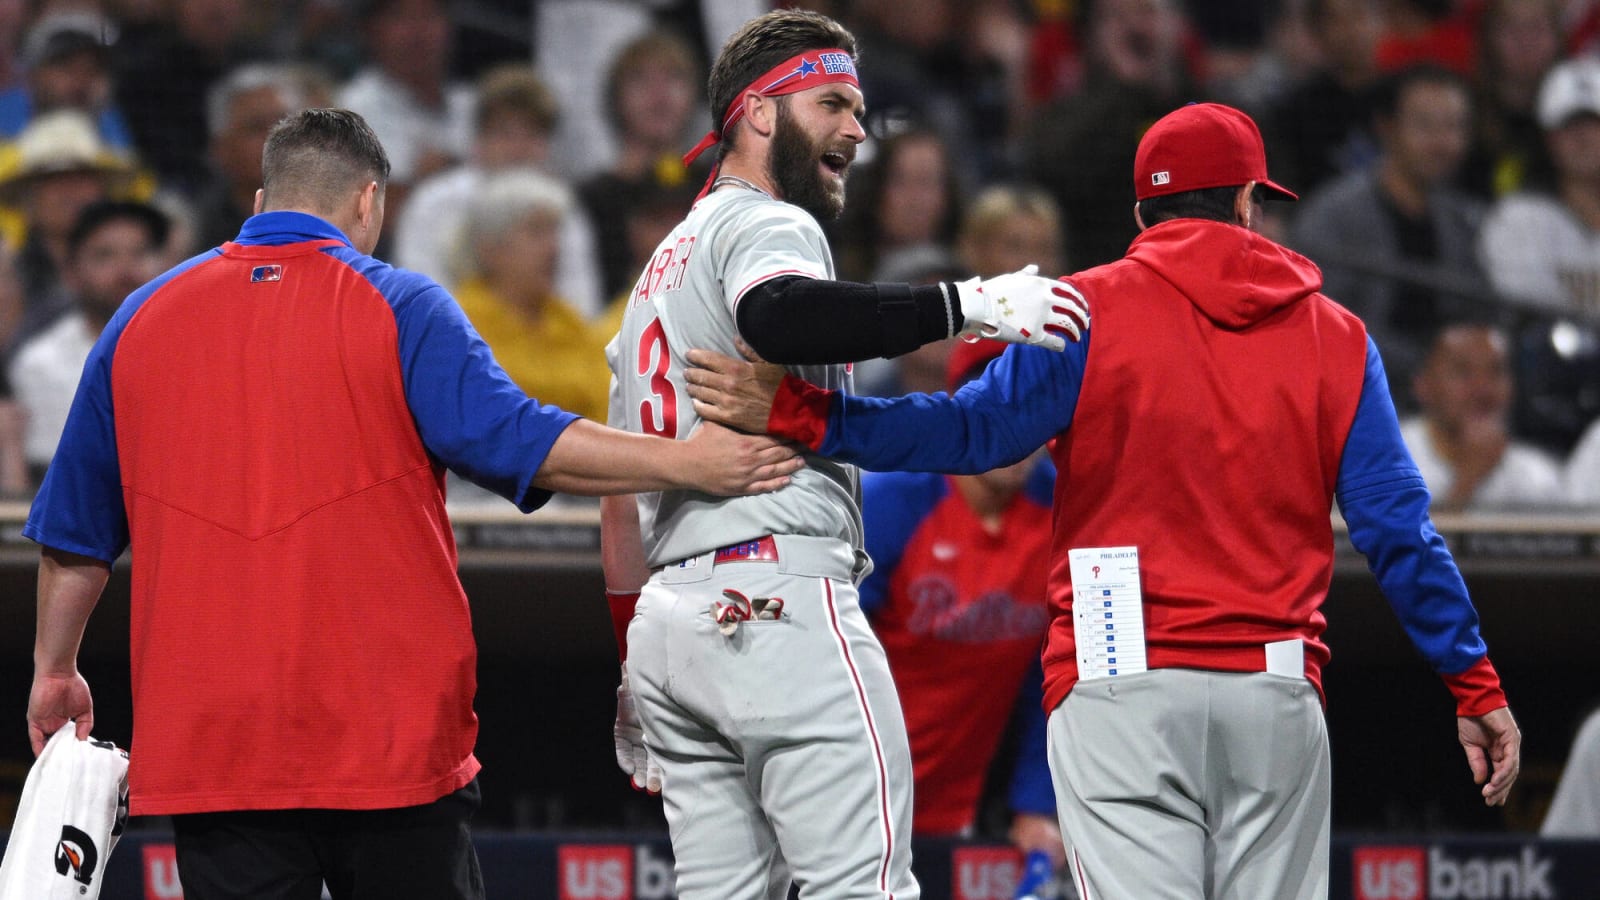 Bryce Harper expected to miss at least six weeks